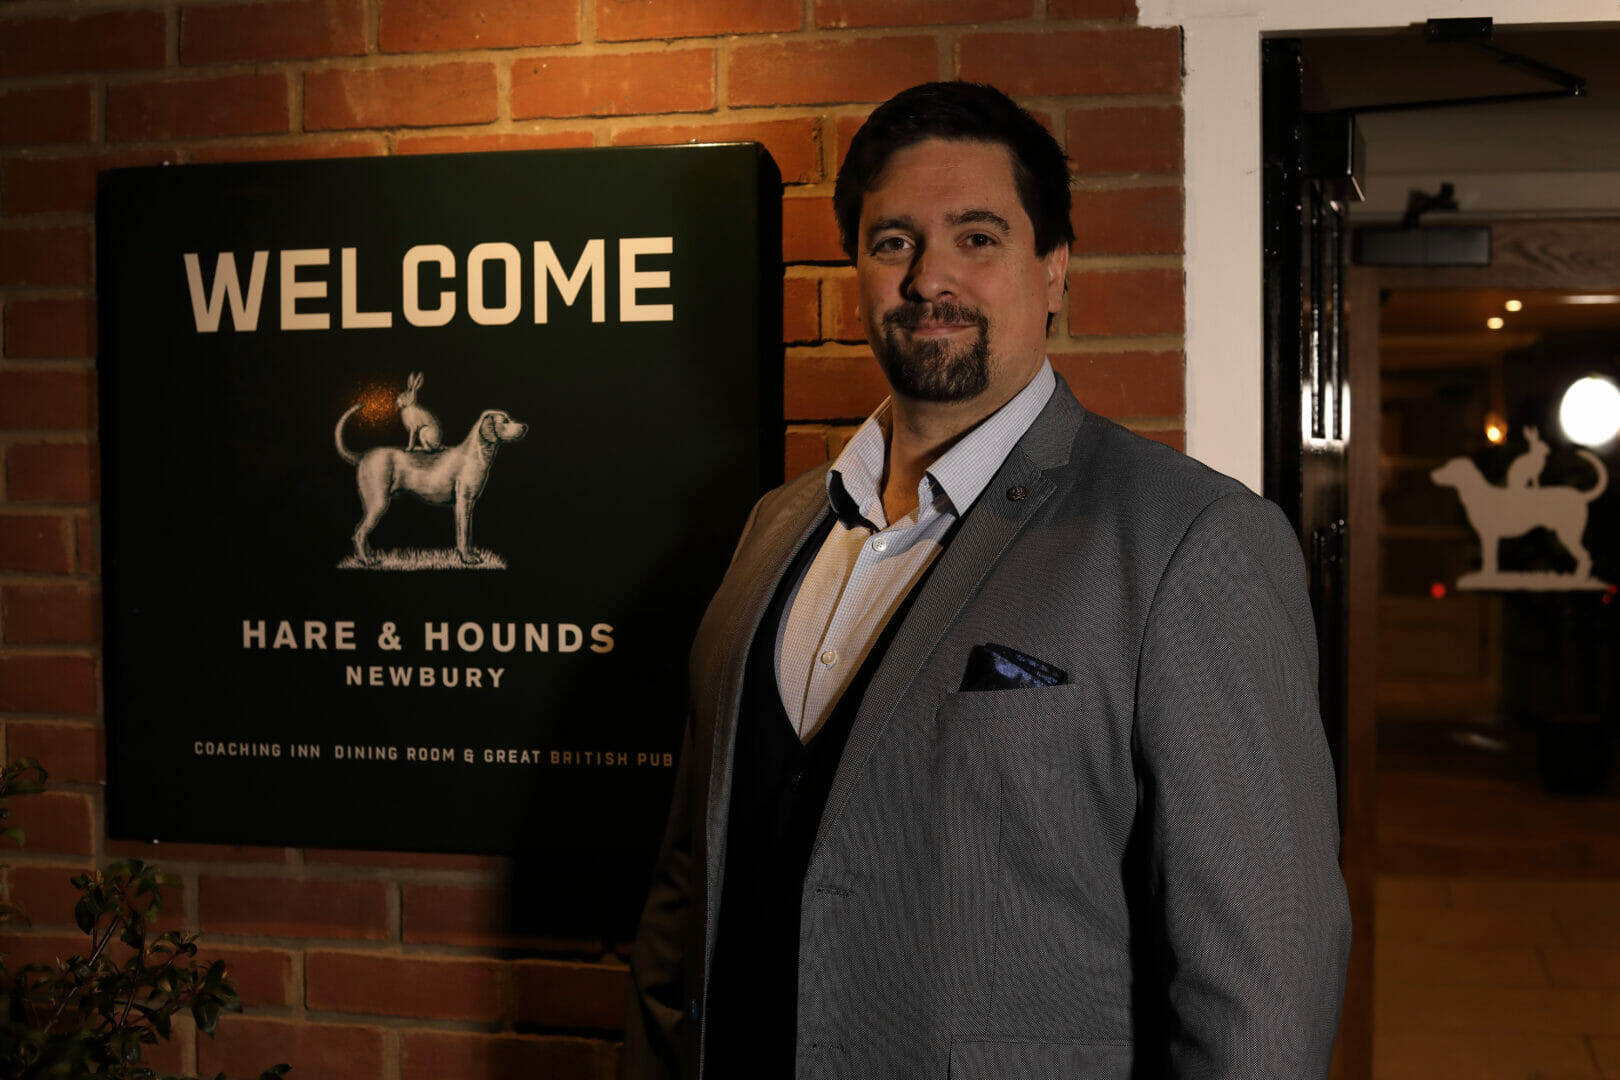 HARE & HOUNDS, NEWBURY CELEBRATES ITS 1st YEAR OF BUSINESS AND APPOINTS NEW GENERAL MANAGER: CHRIS CONNOR